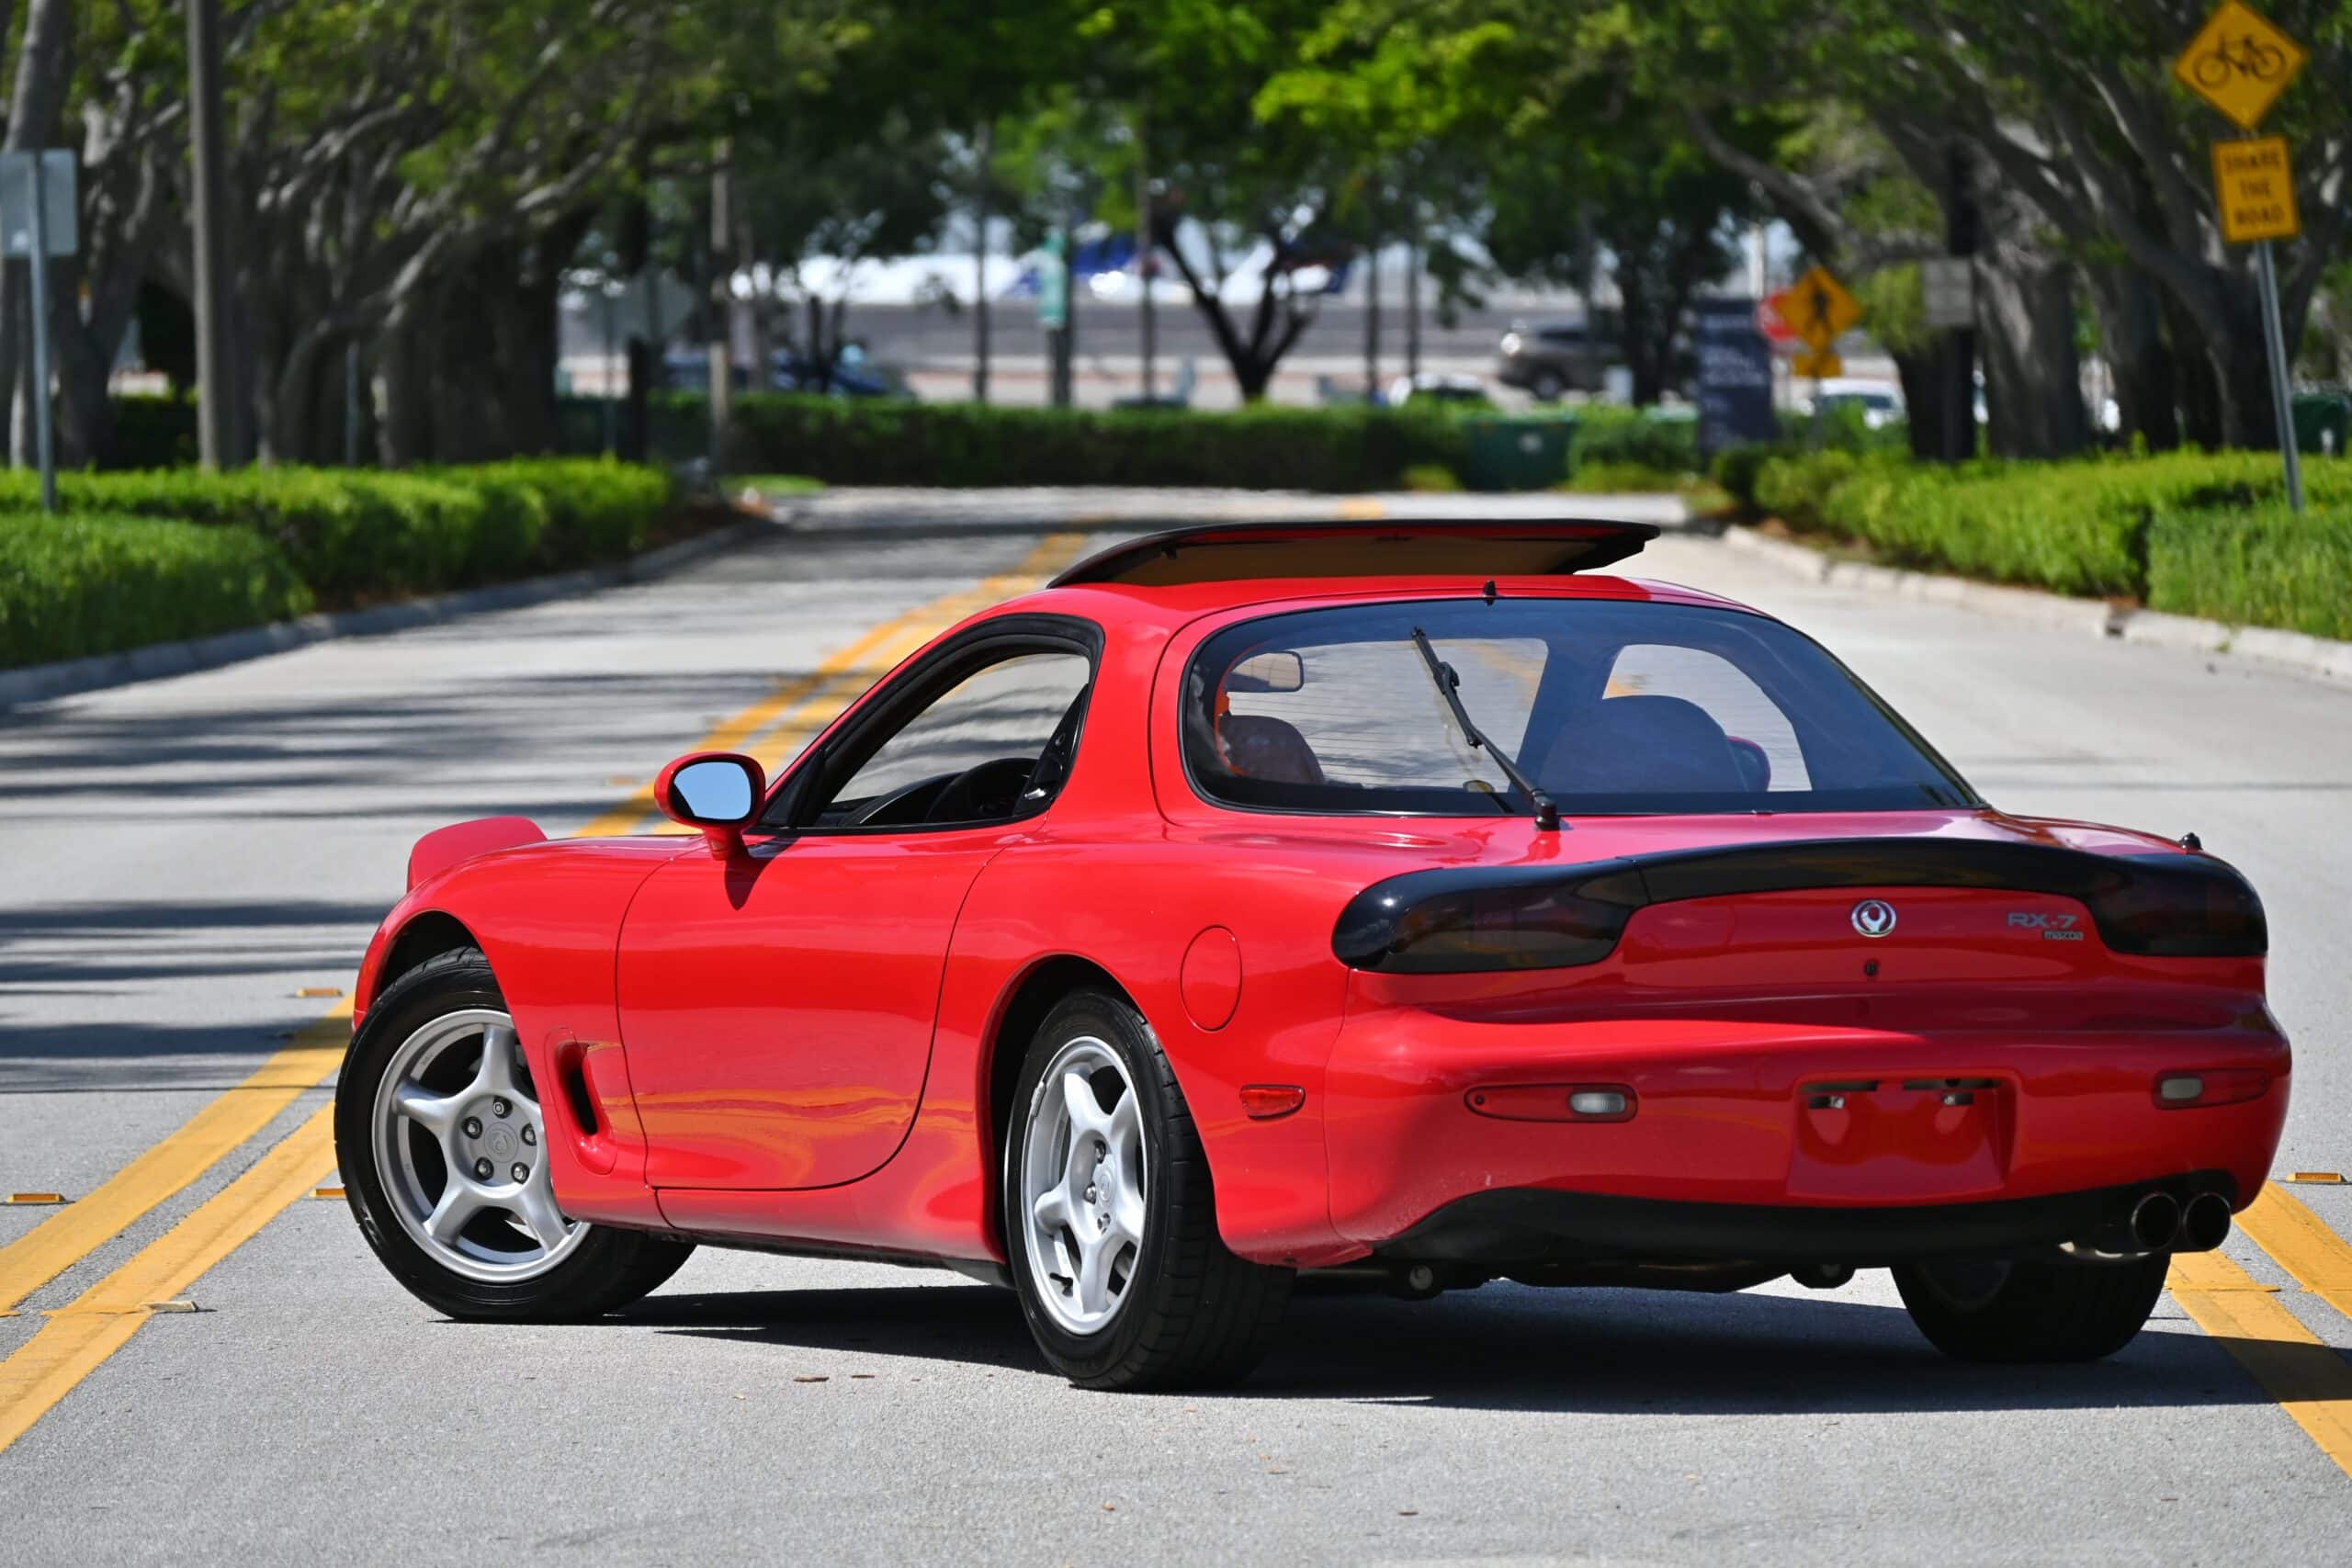 1993 Mazda RX-7 FD3S Twin Turbo Only 41K Miles – Desirable Color Combo -5 Speed Manual- Freshly Serviced